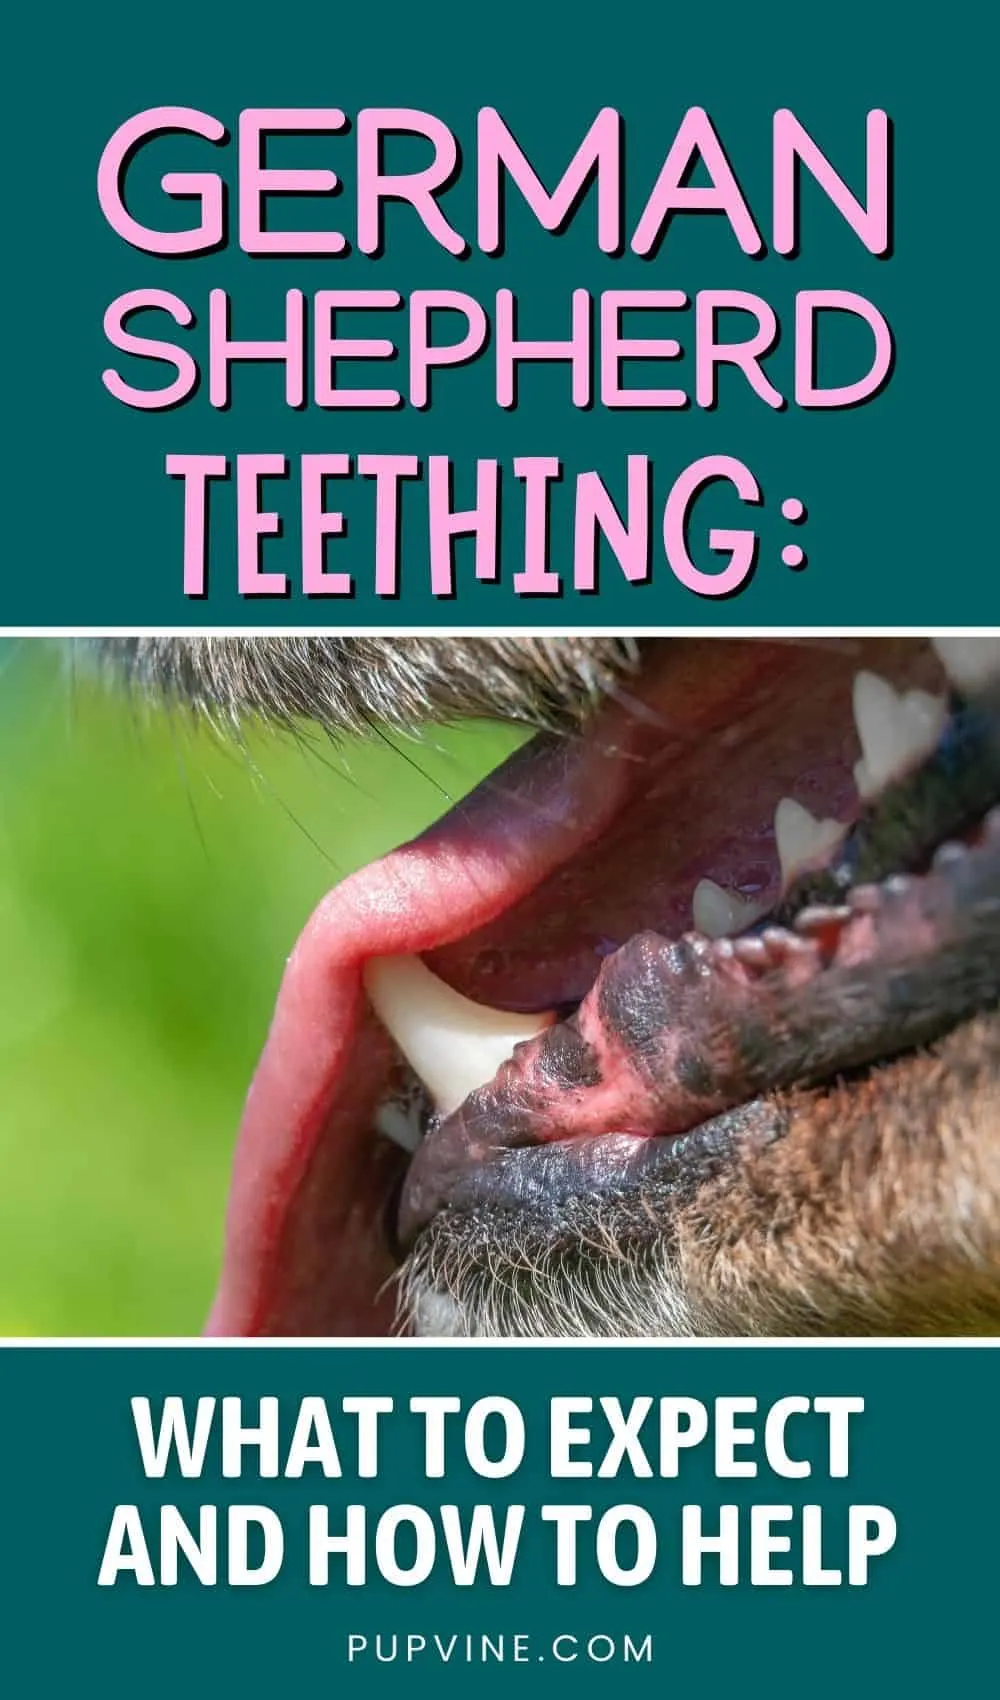 German Shepherd Teething: What To Expect And How To Help